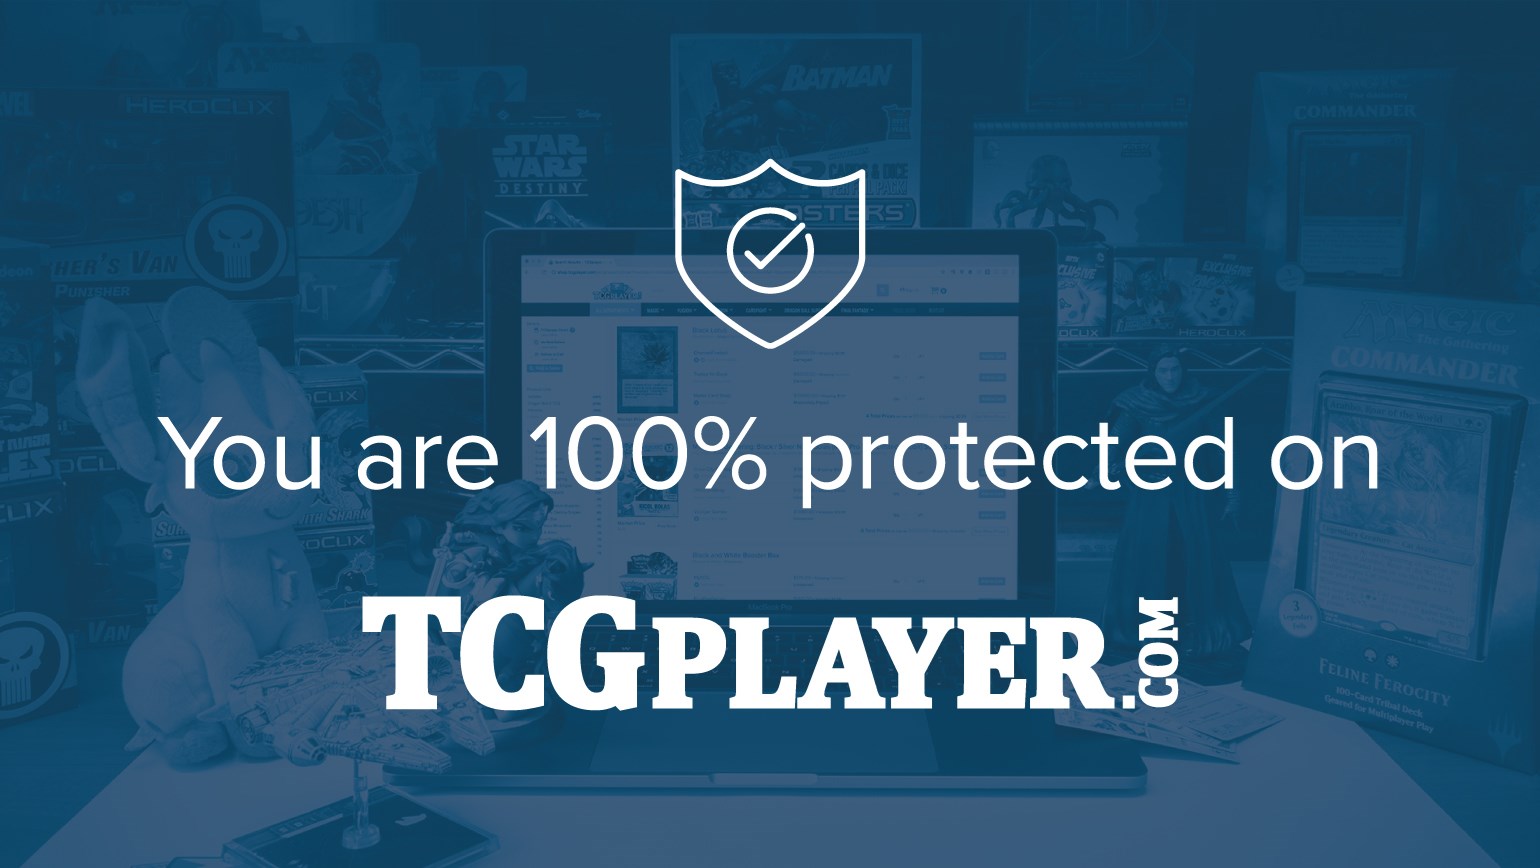 You Are 100% Protected When Selling or Buying on TCGplayer